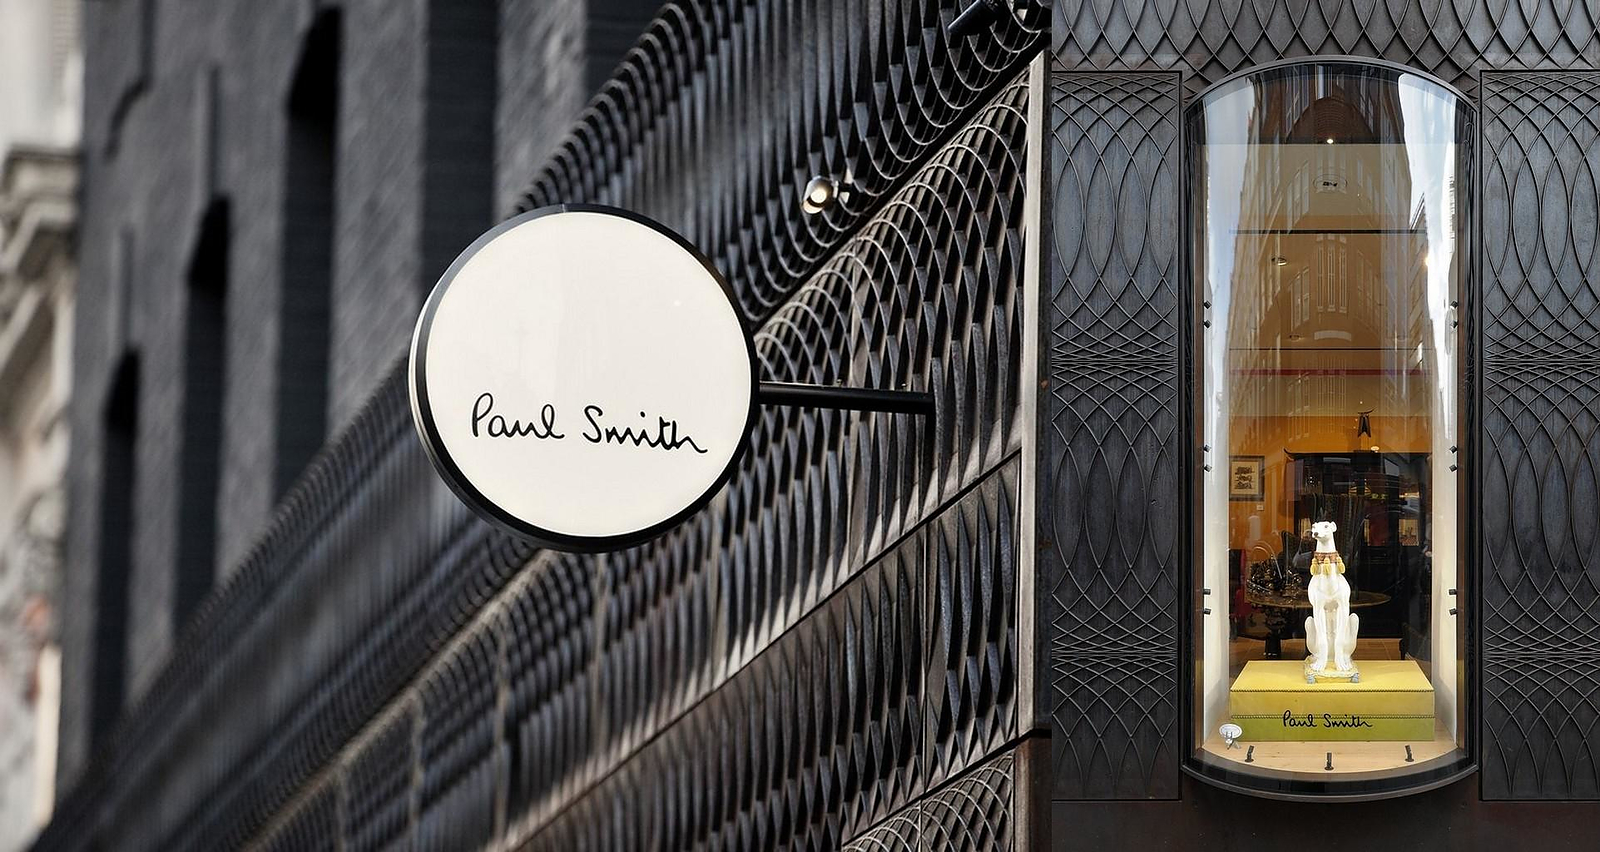 Paul Smith Albemarle Street Store Extension by 6a Architects.